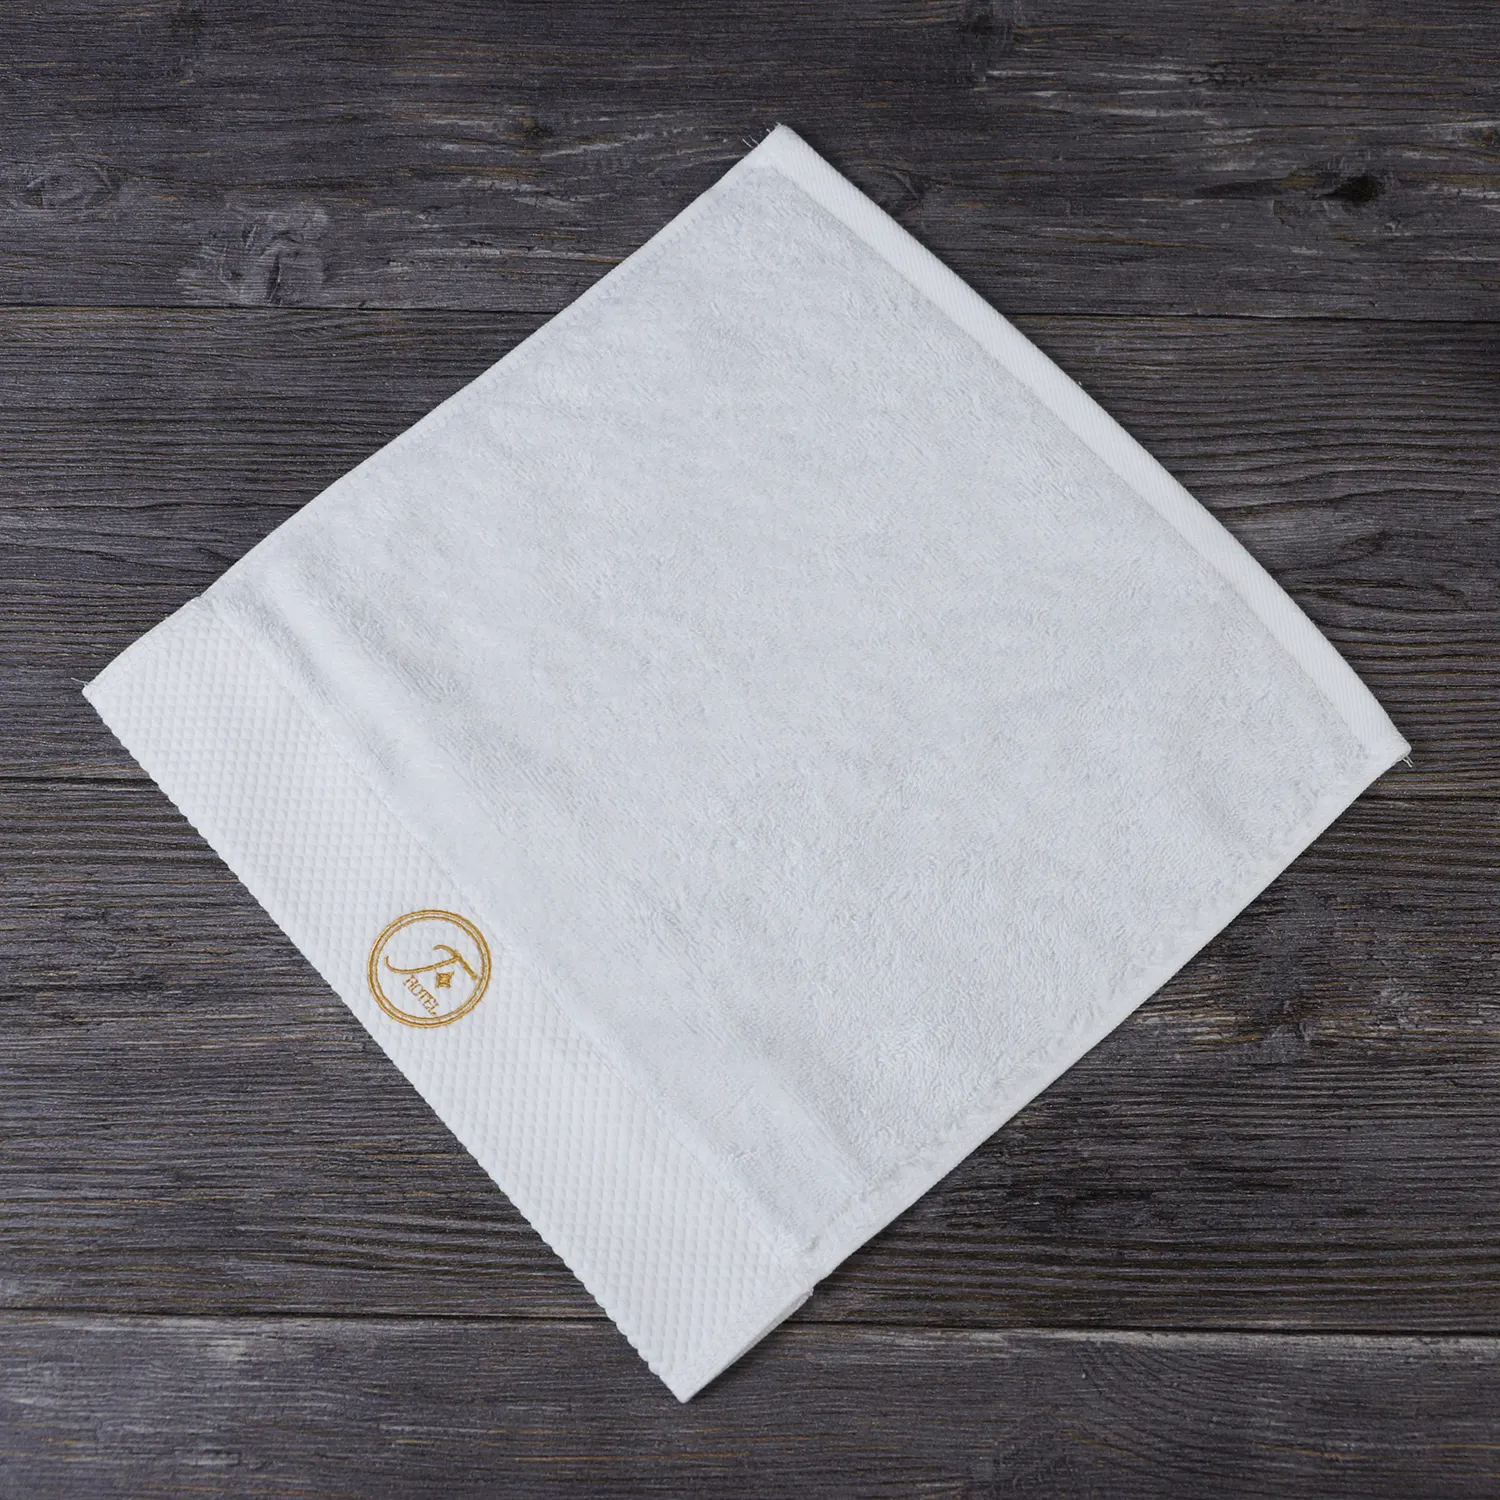 Luxury embroidery face towels,100 cotton customised personalized face towel